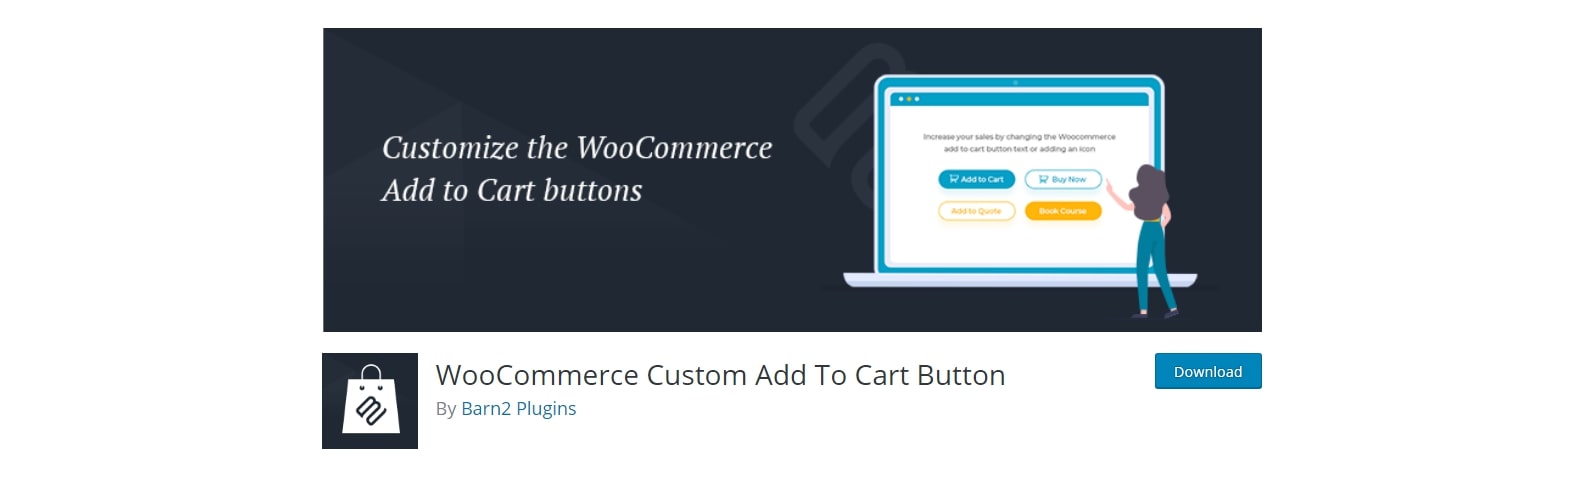 WooCommerce Custom Add To Cart Button